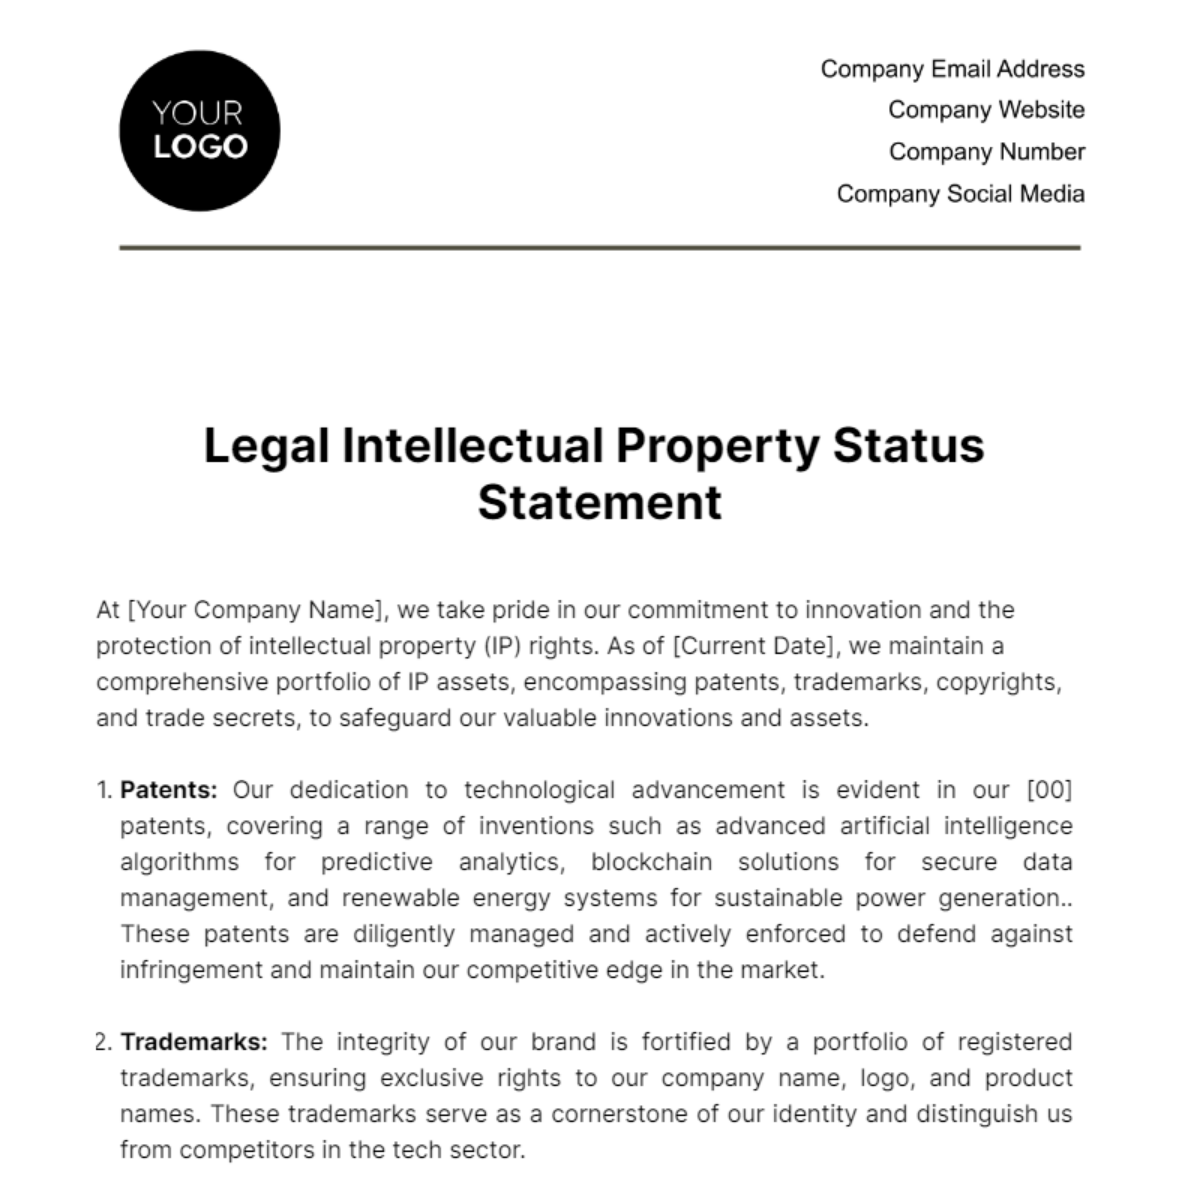 Free Legal Intellectual Property Status Statement Template